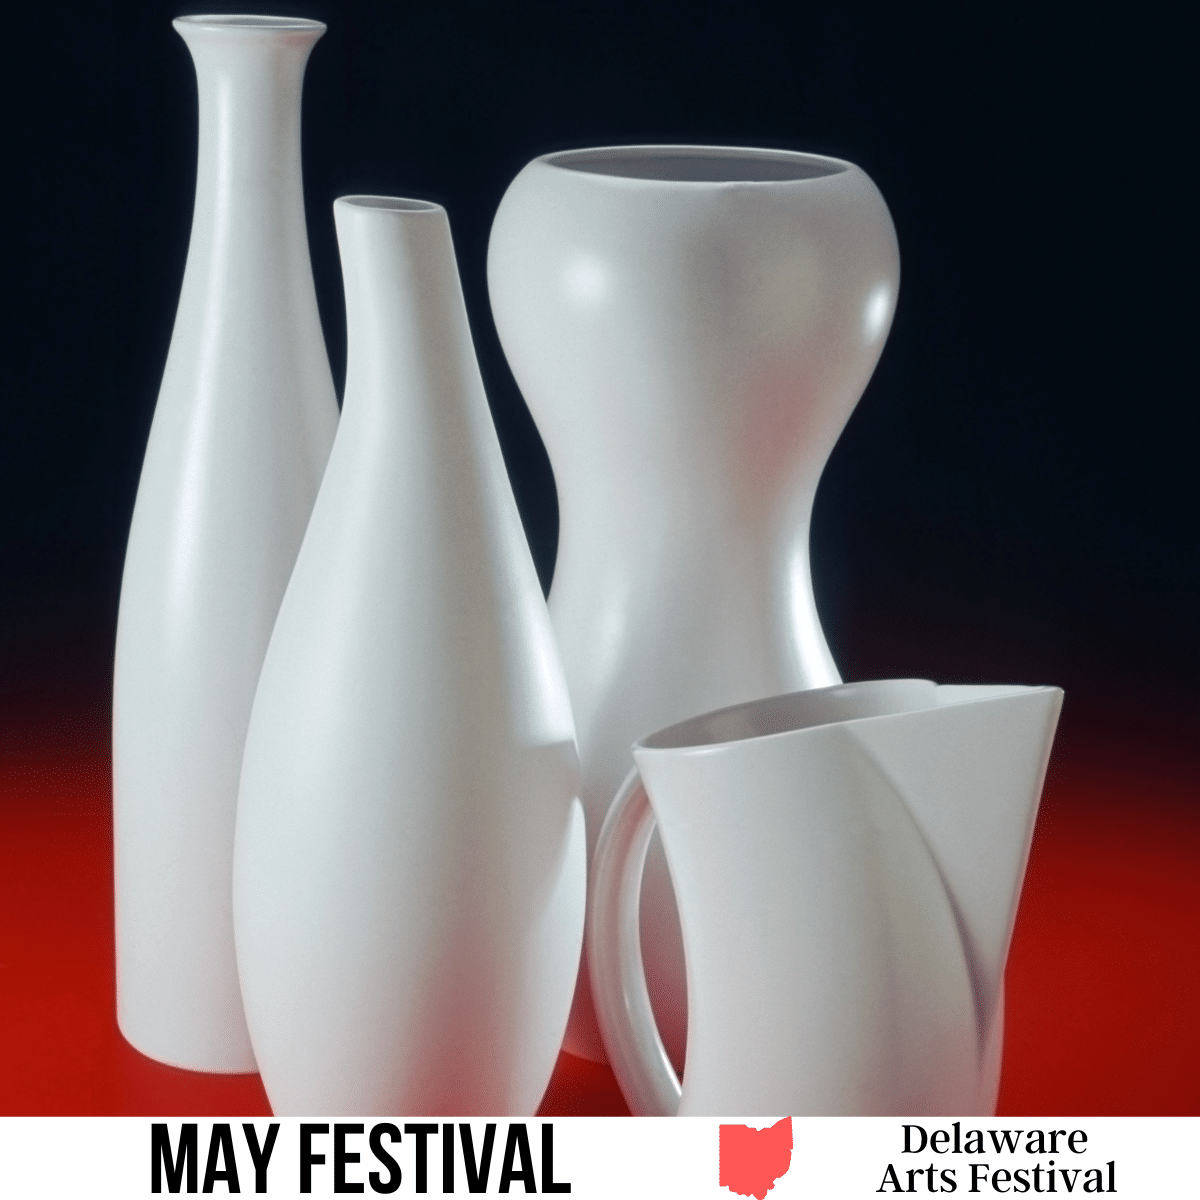 A square image of a photo of 3 white vases and a small white pitcher on a red and black background. A white strip across the bottom has the text May Festival Delaware Arts Festival